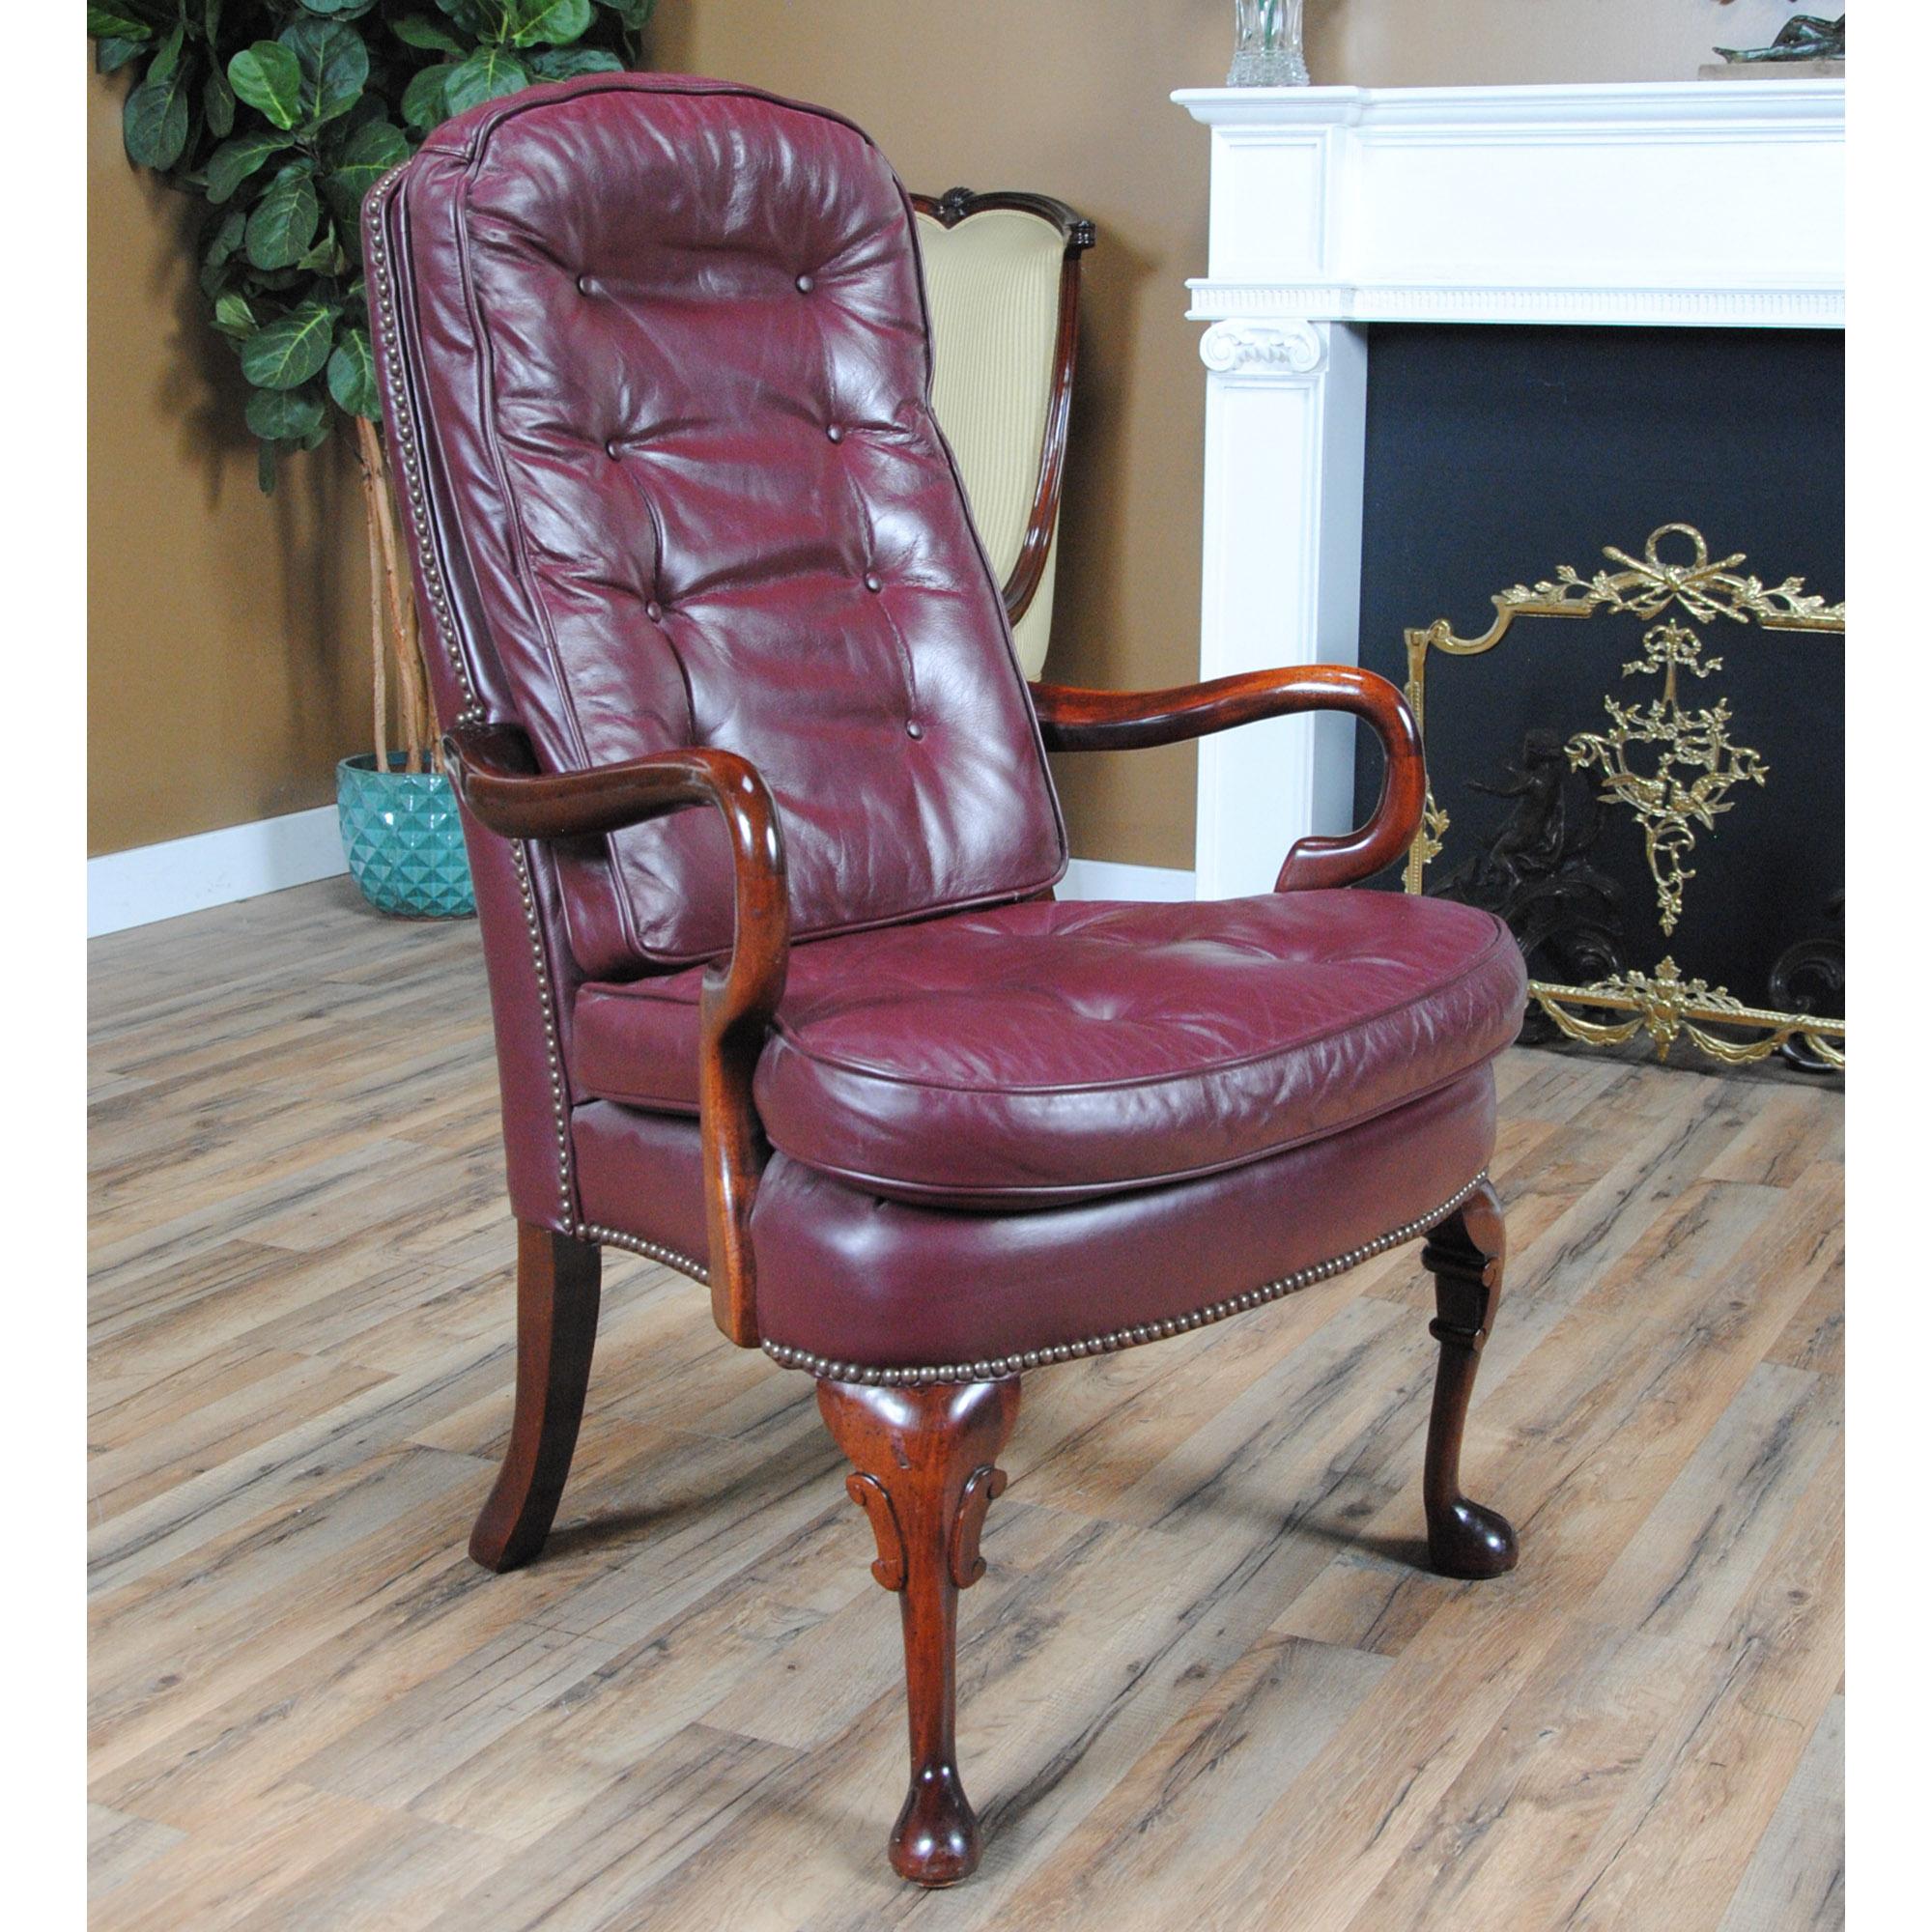 A Vintage Classic Leather Office Chair in excellent original, as found, condition.

Both elegant and incredibly detailed this beautiful Vintage Classic Leather Office Chair has everything one could ask for as a center point for either the office